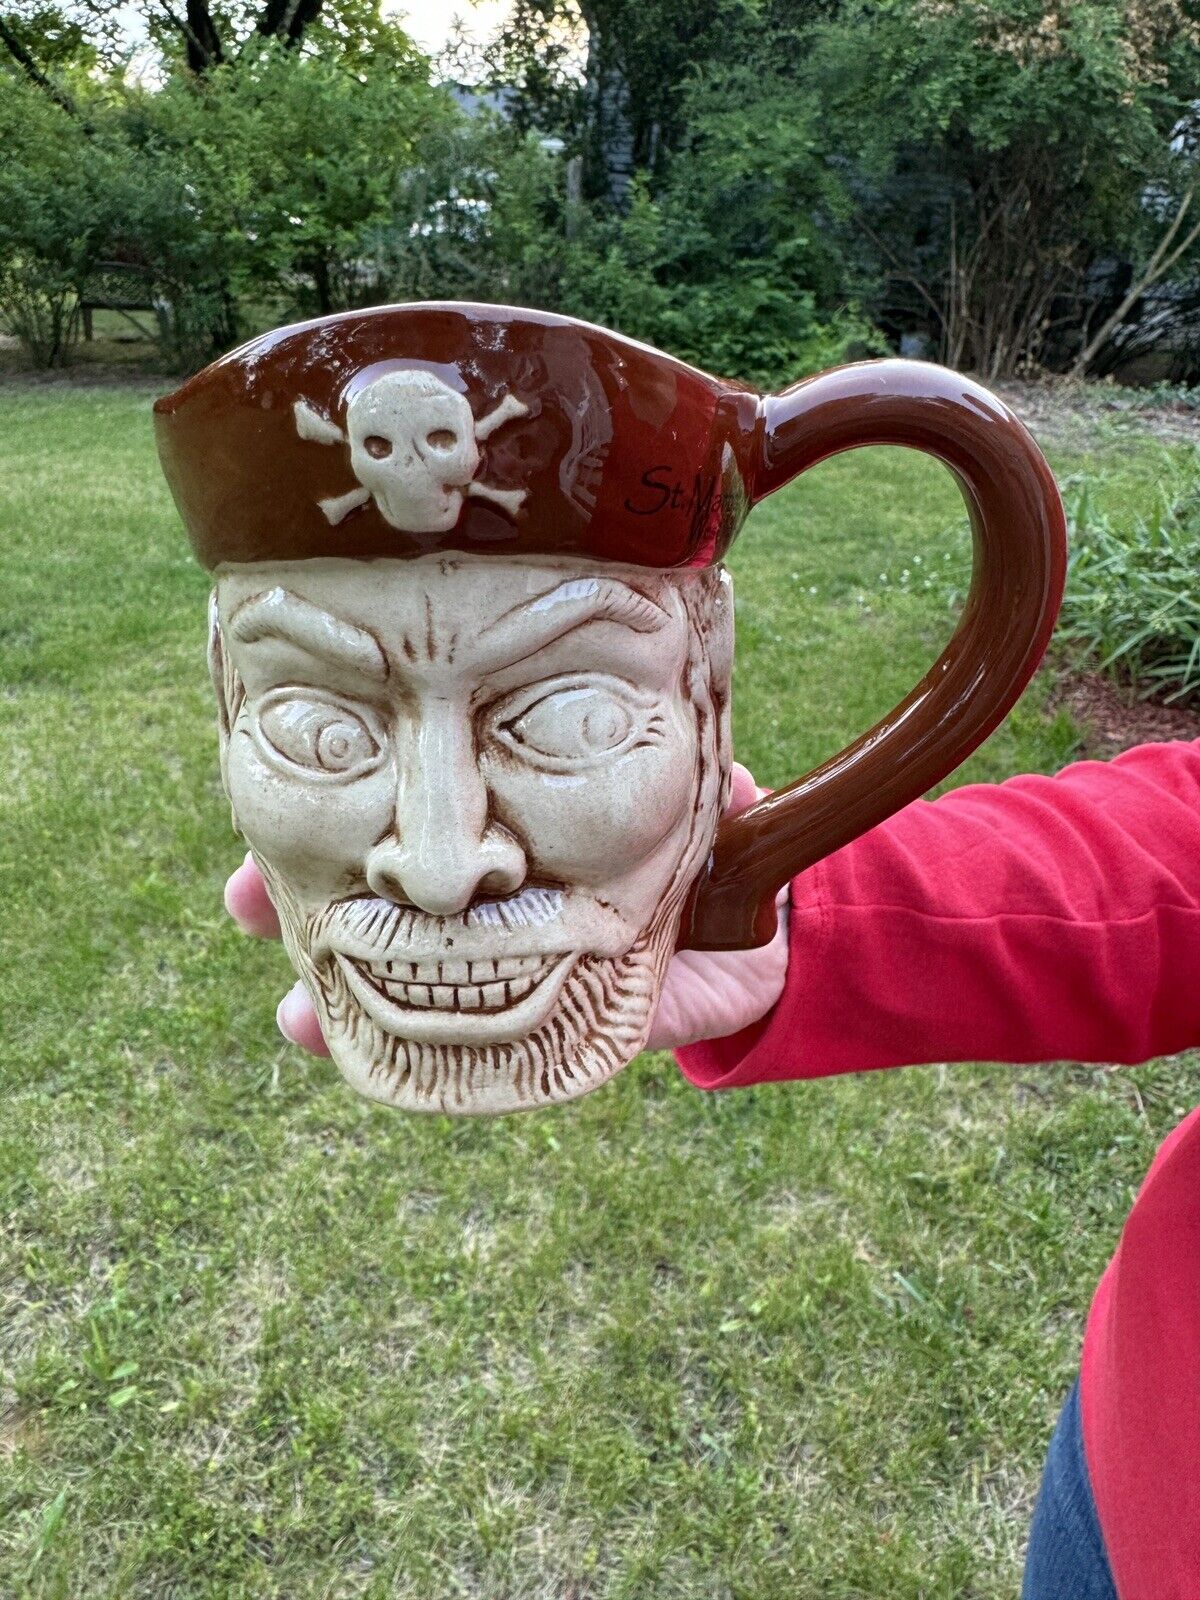 Vintage Agiftcorp. Pirate Stein Mug, Collectible Ceramic St. Martin West Indies 